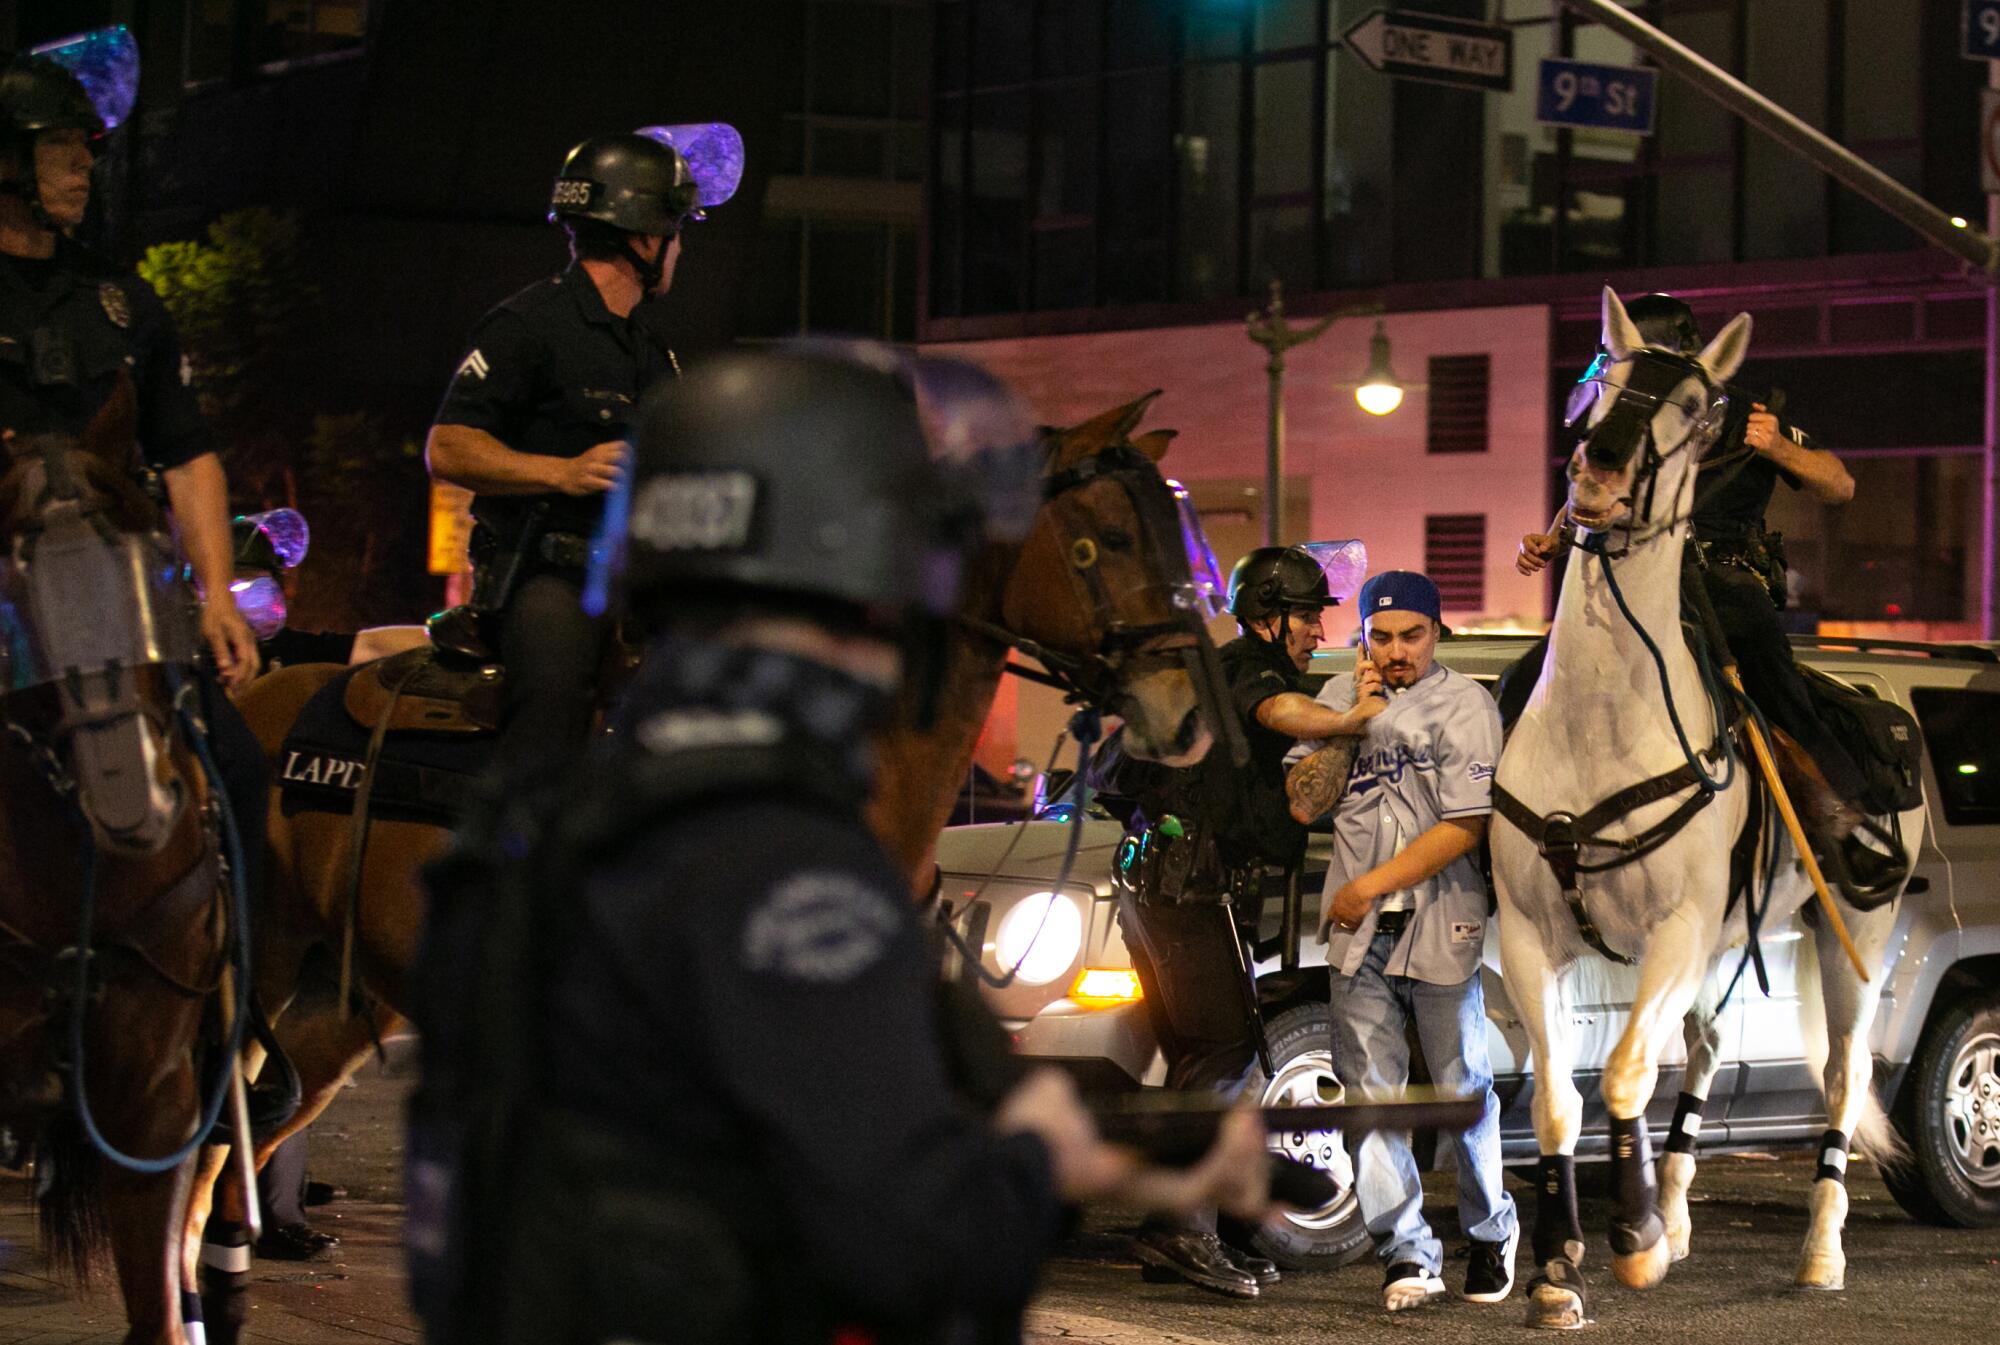 An officer holds a weapon, and another pulls a man in a Dodgers jersey as police on horseback trot past.